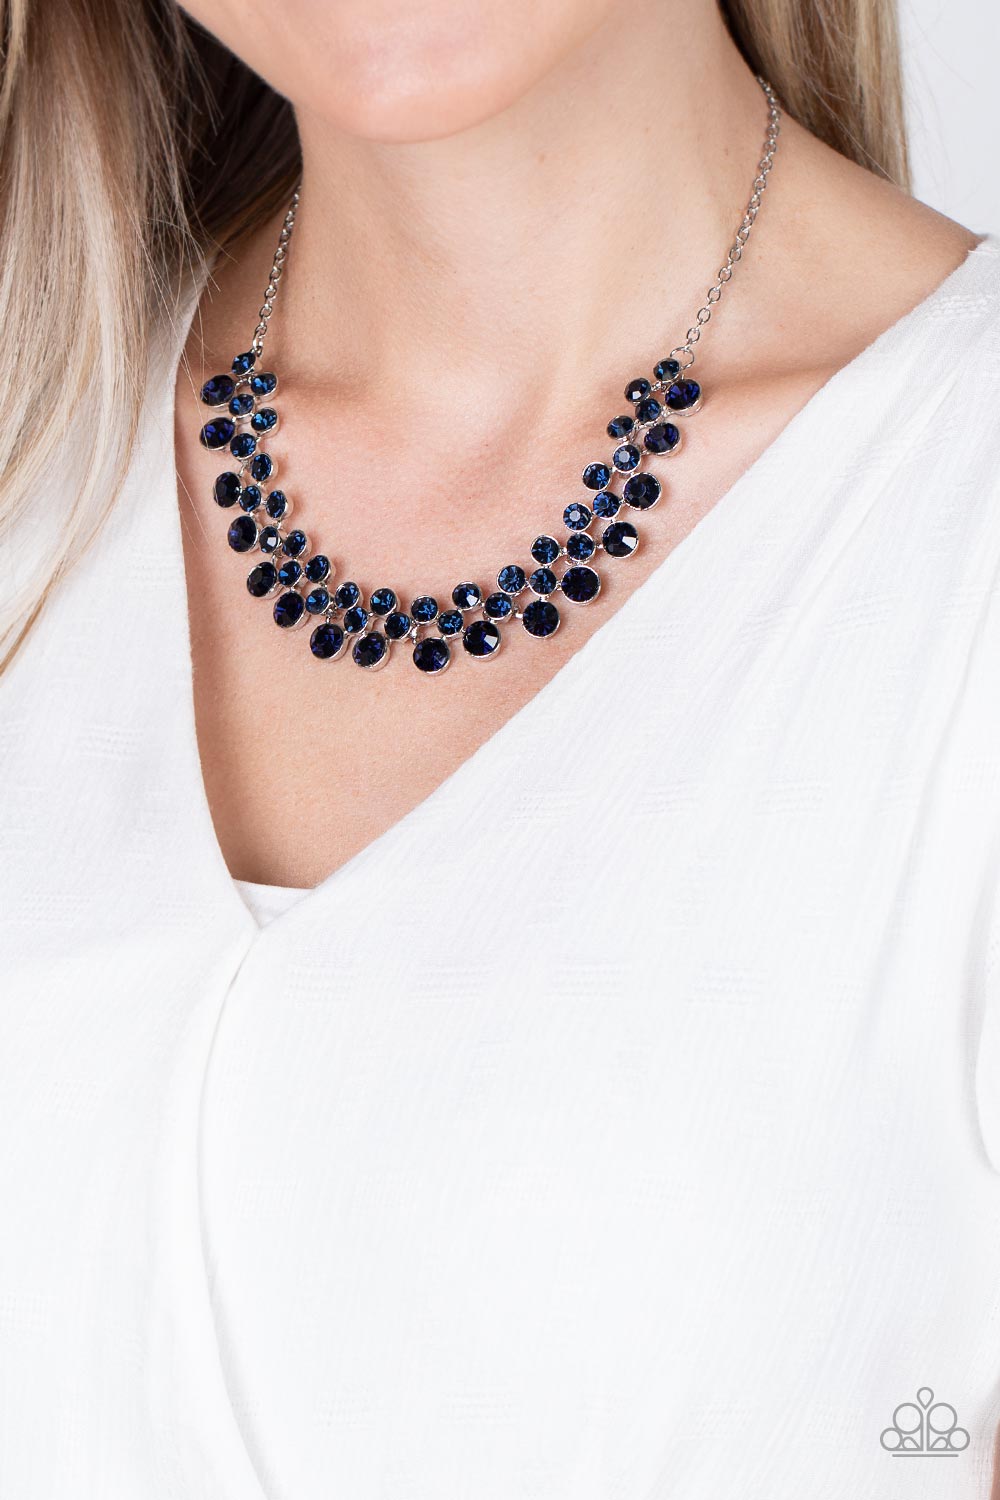 Won The Lottery - Blue Rhinestone Necklace Paparazzi Accessories